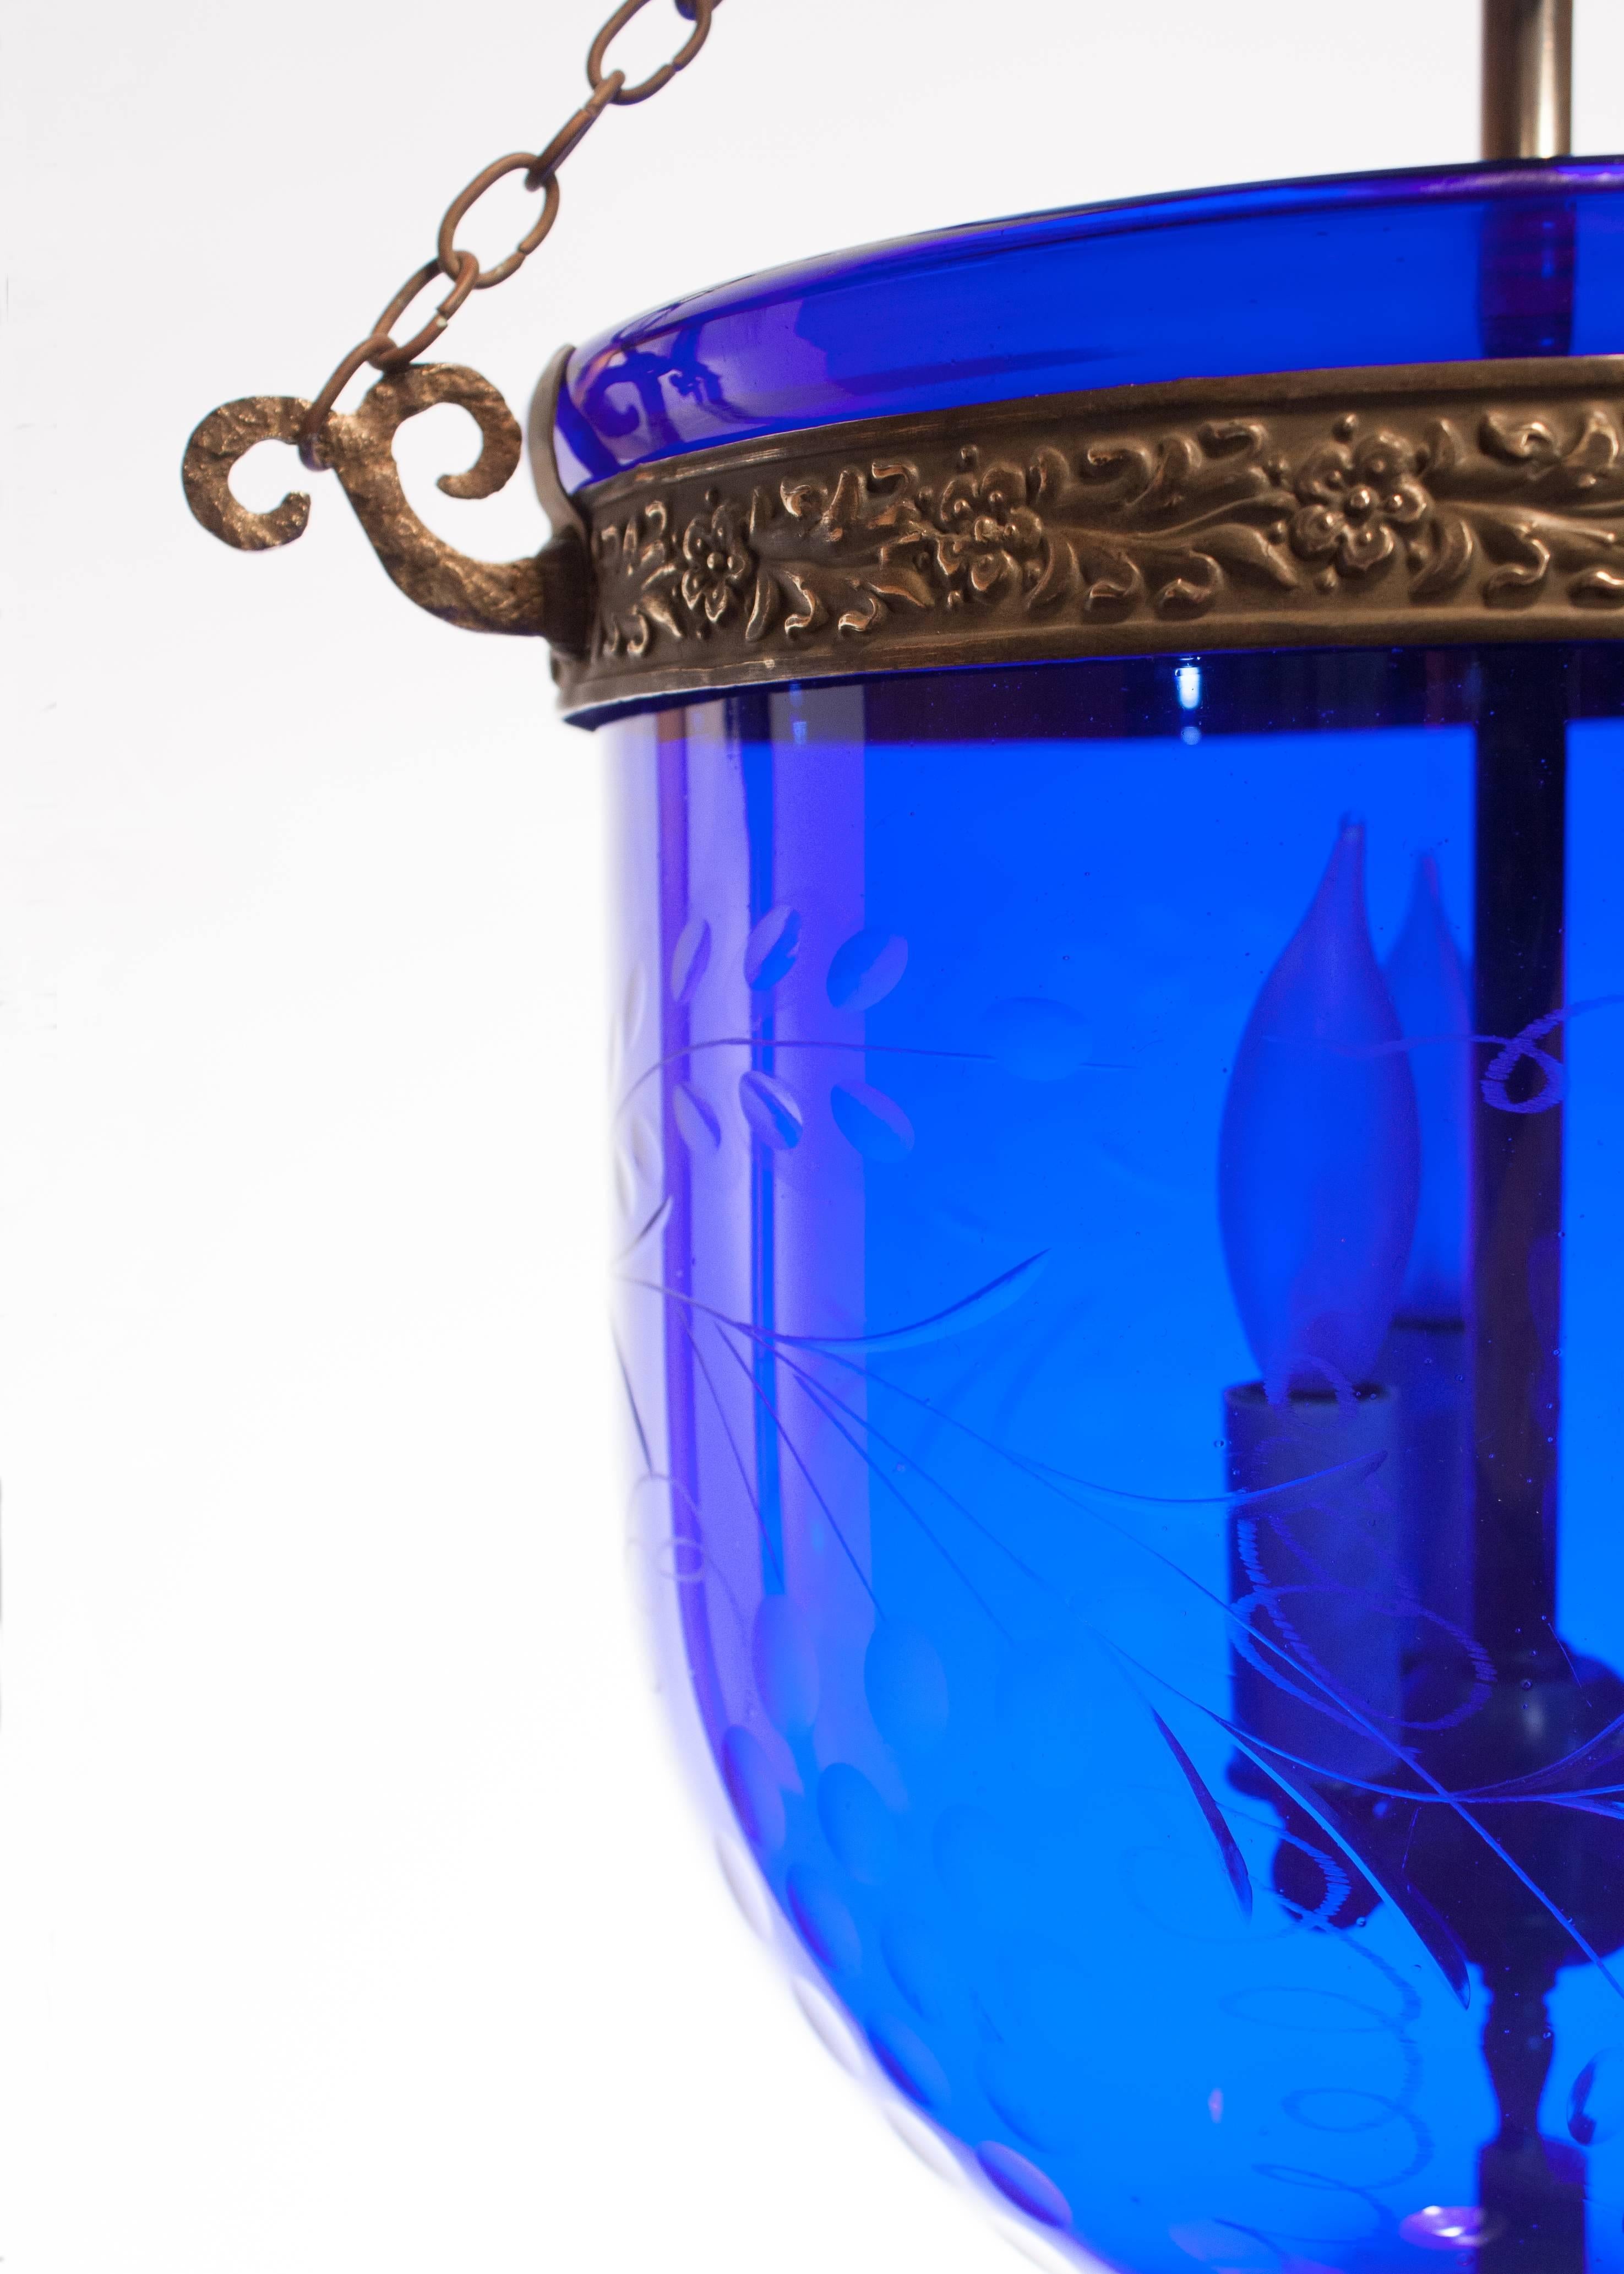 The deep cobalt color, flawless form and finely etched grape leaf design make this lantern a rare gem in Fair Trade's bell jar collection. Handblown in England by S&C Bishop & Co., circa 1890, the Bishop name is discretely marked on the glass and